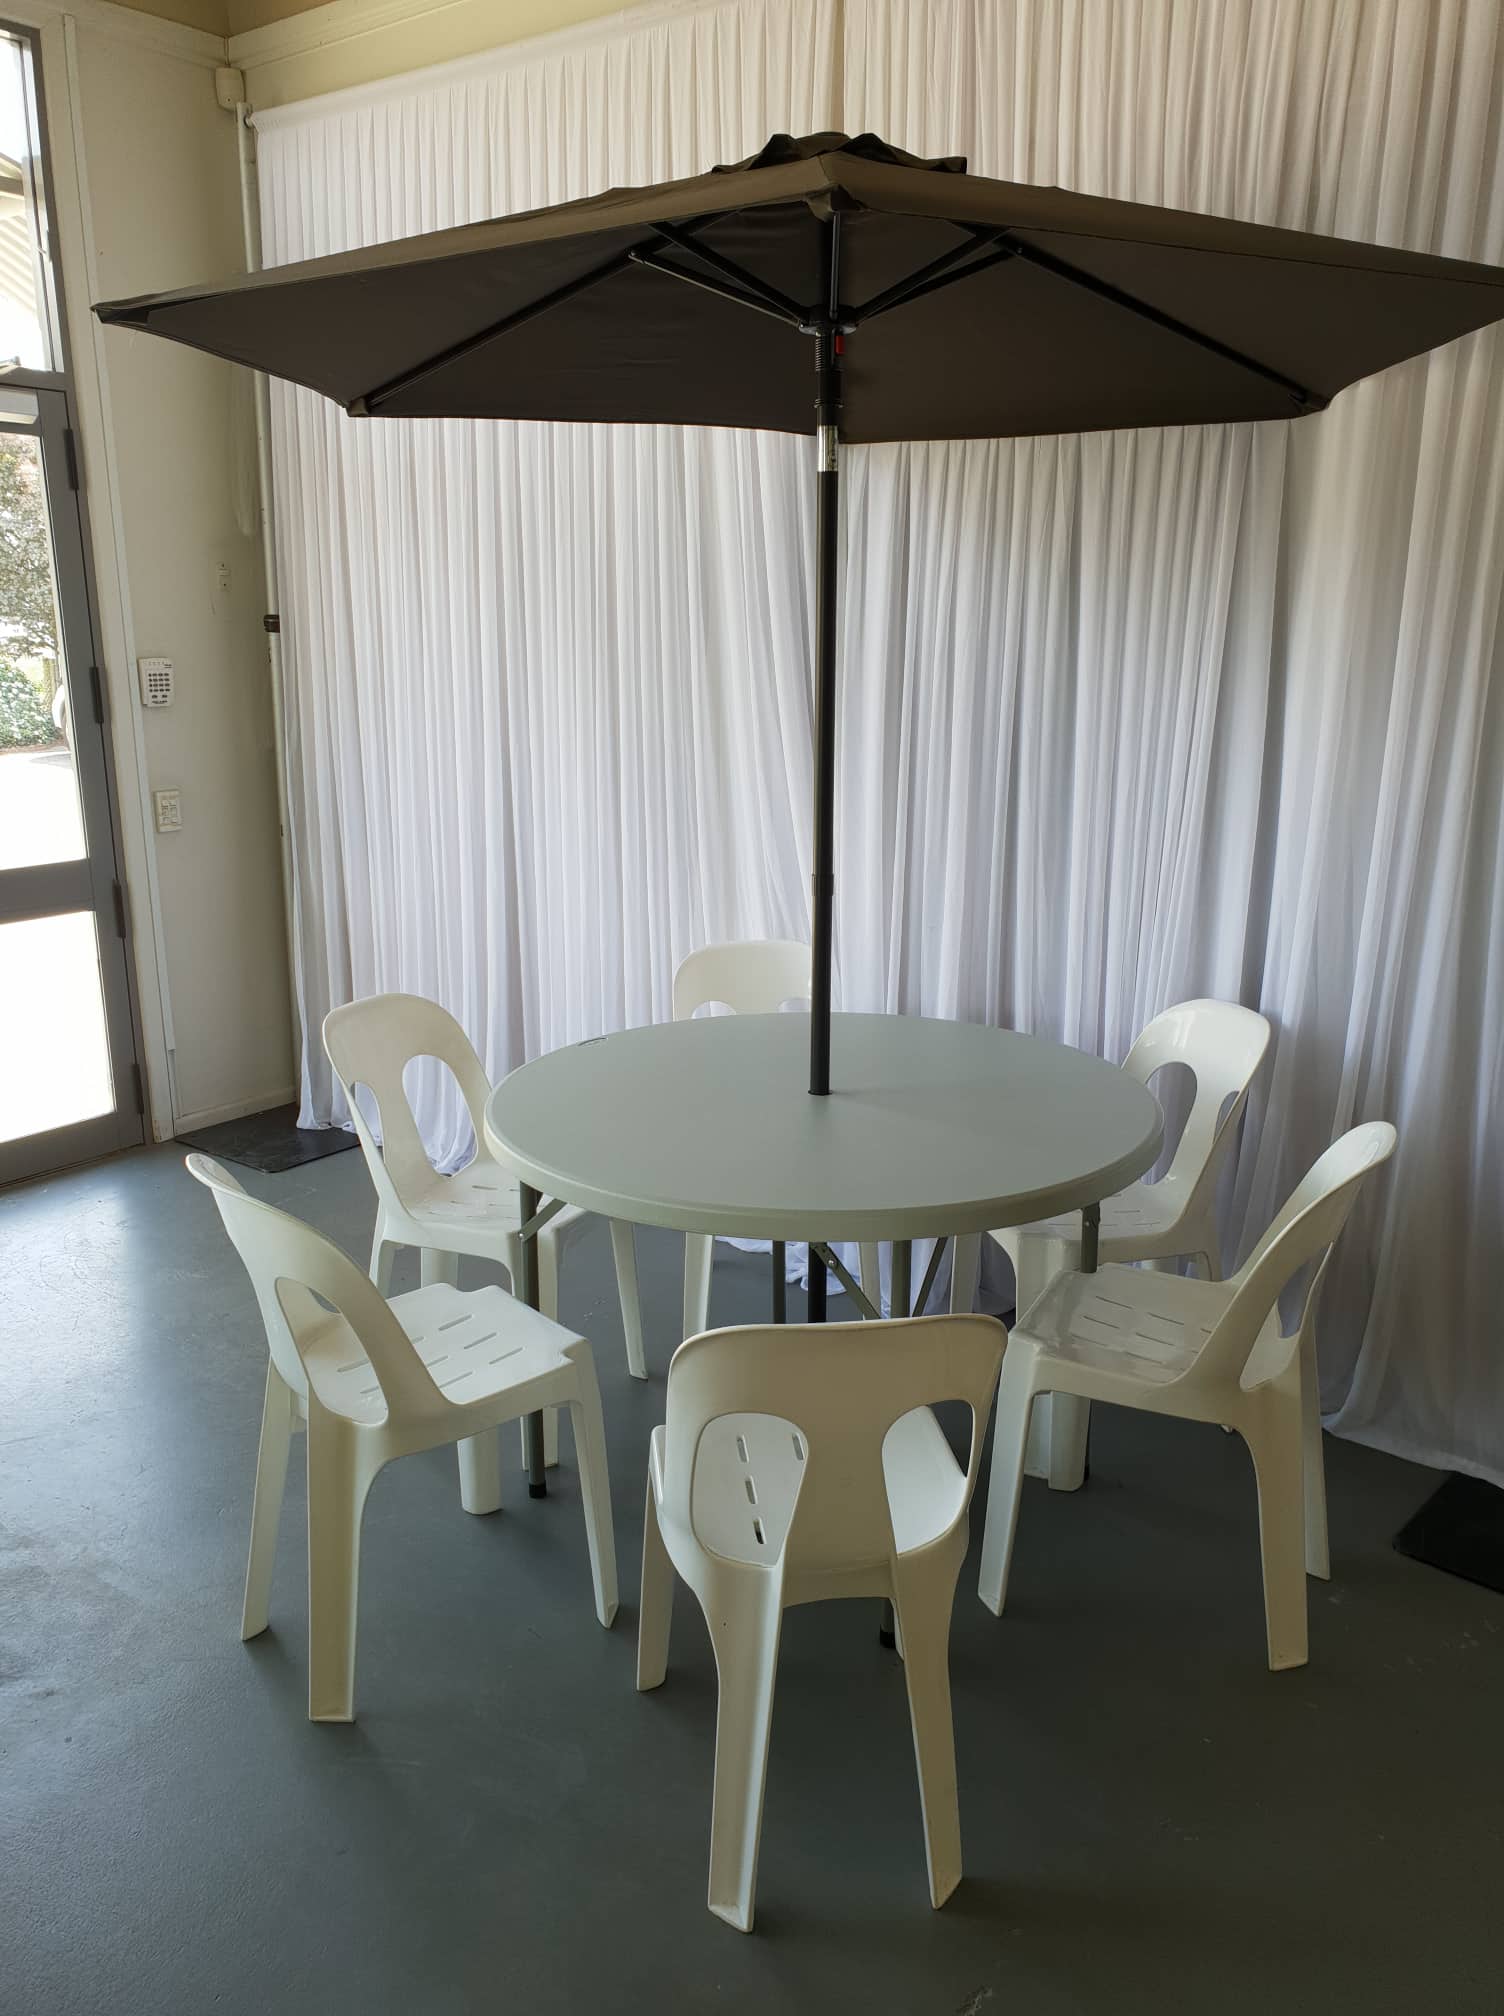 4 foot round table with umbrella